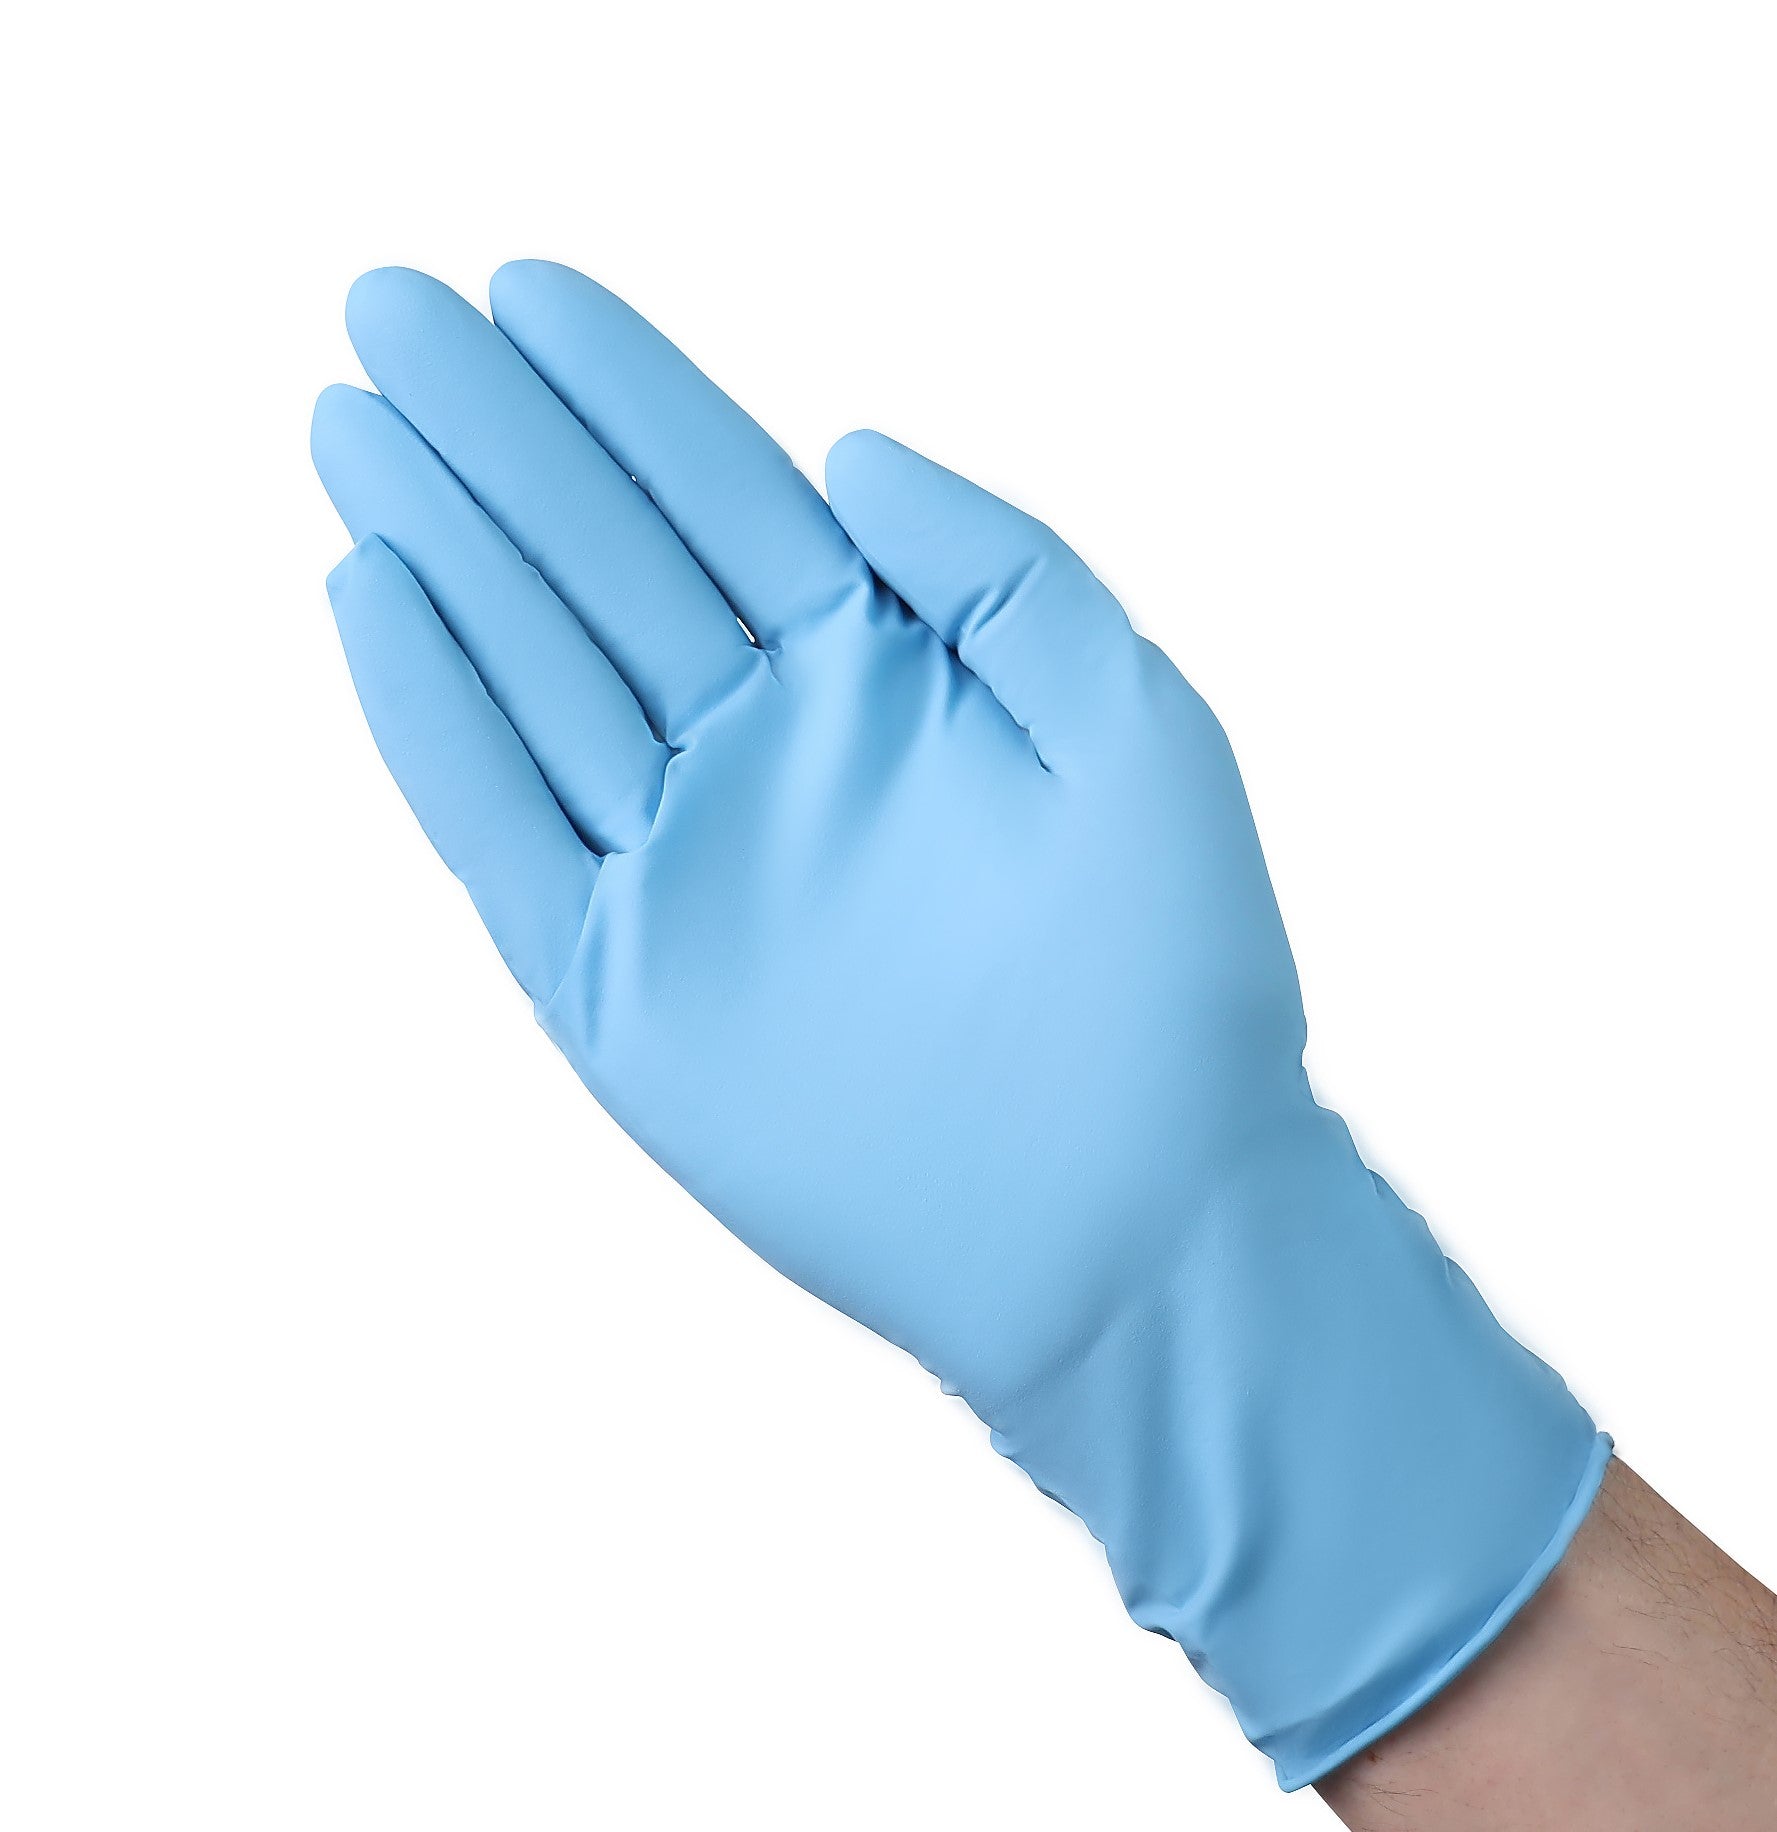 A1DH1 Blue 8.7 mil Nitrile Chemo Exam Disposable Gloves with 11.5" Extended Cuff